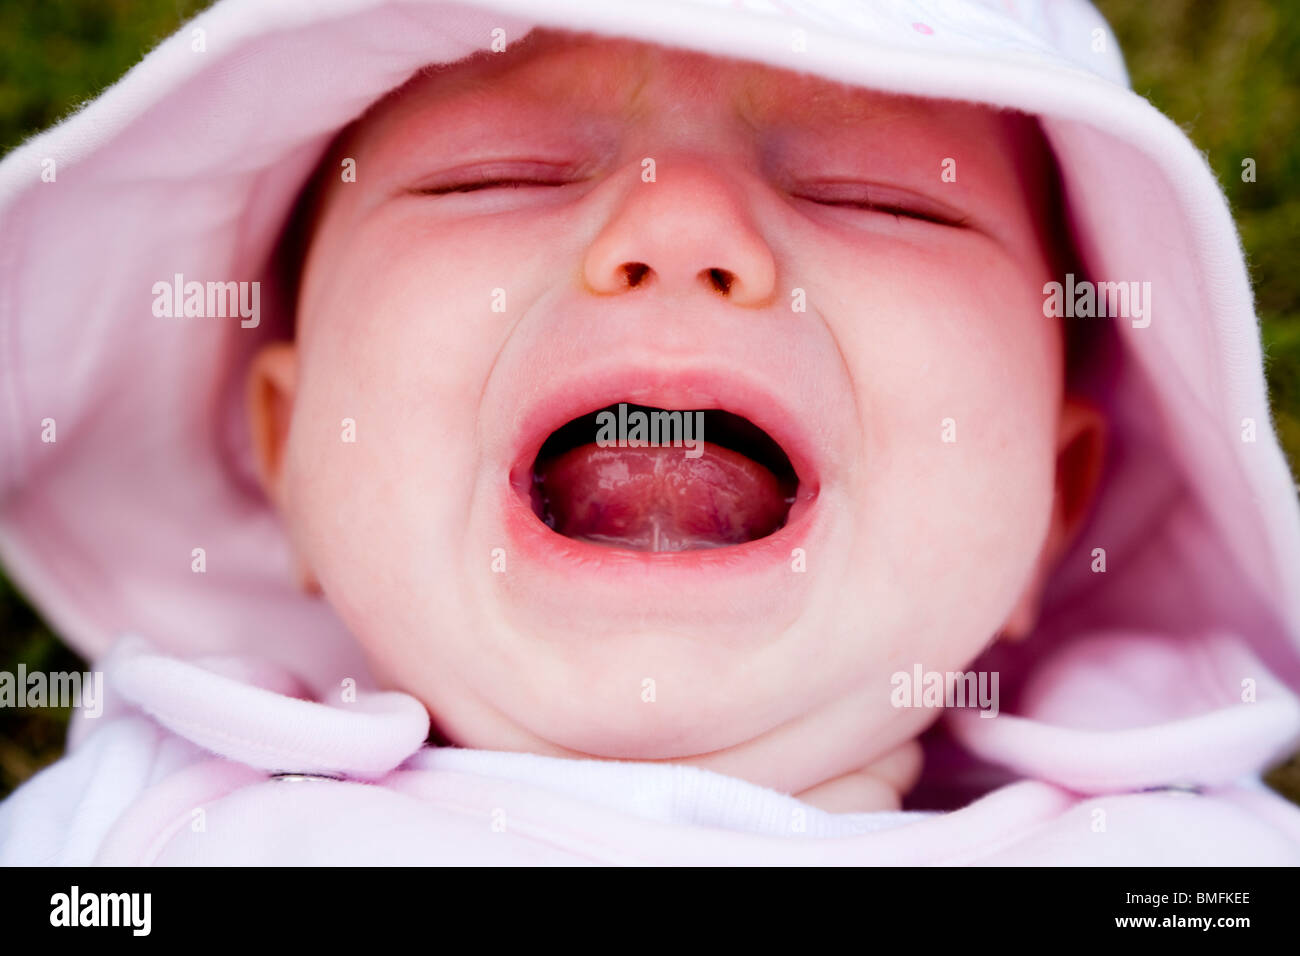 Face of an unhappy baby cry / crying / cries / scream / screaming. Stock Photo